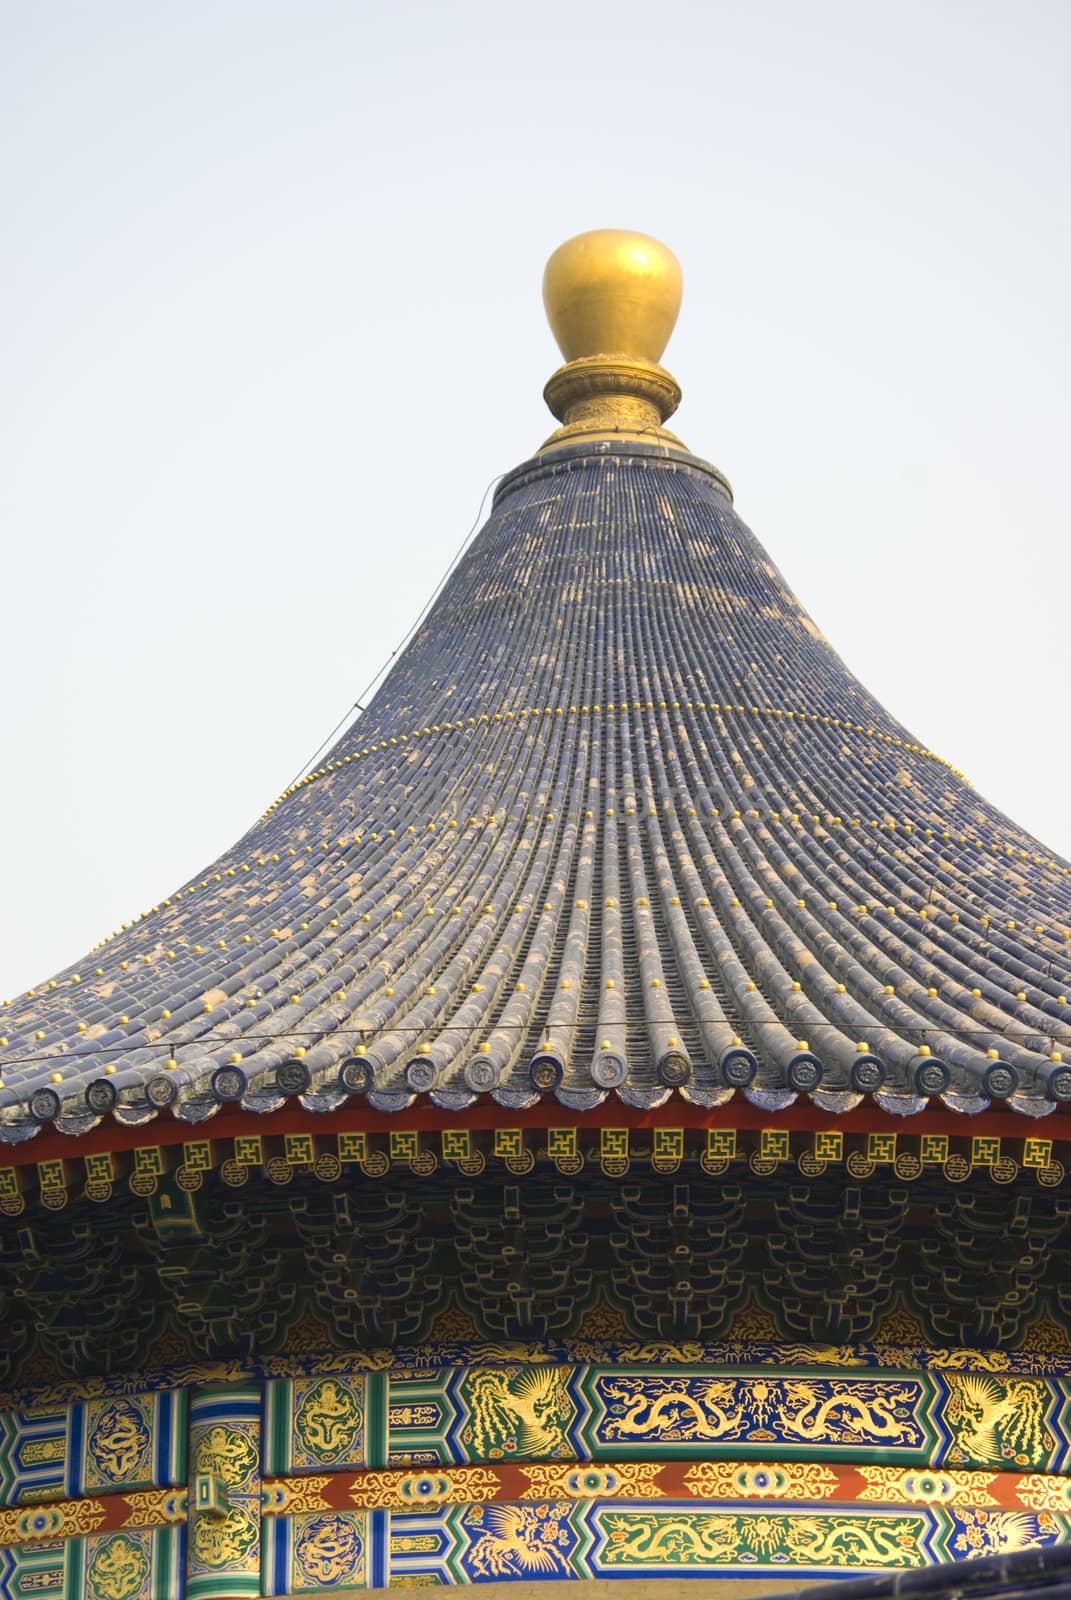 The historical Forbidden City Museum in the center of Beijing.